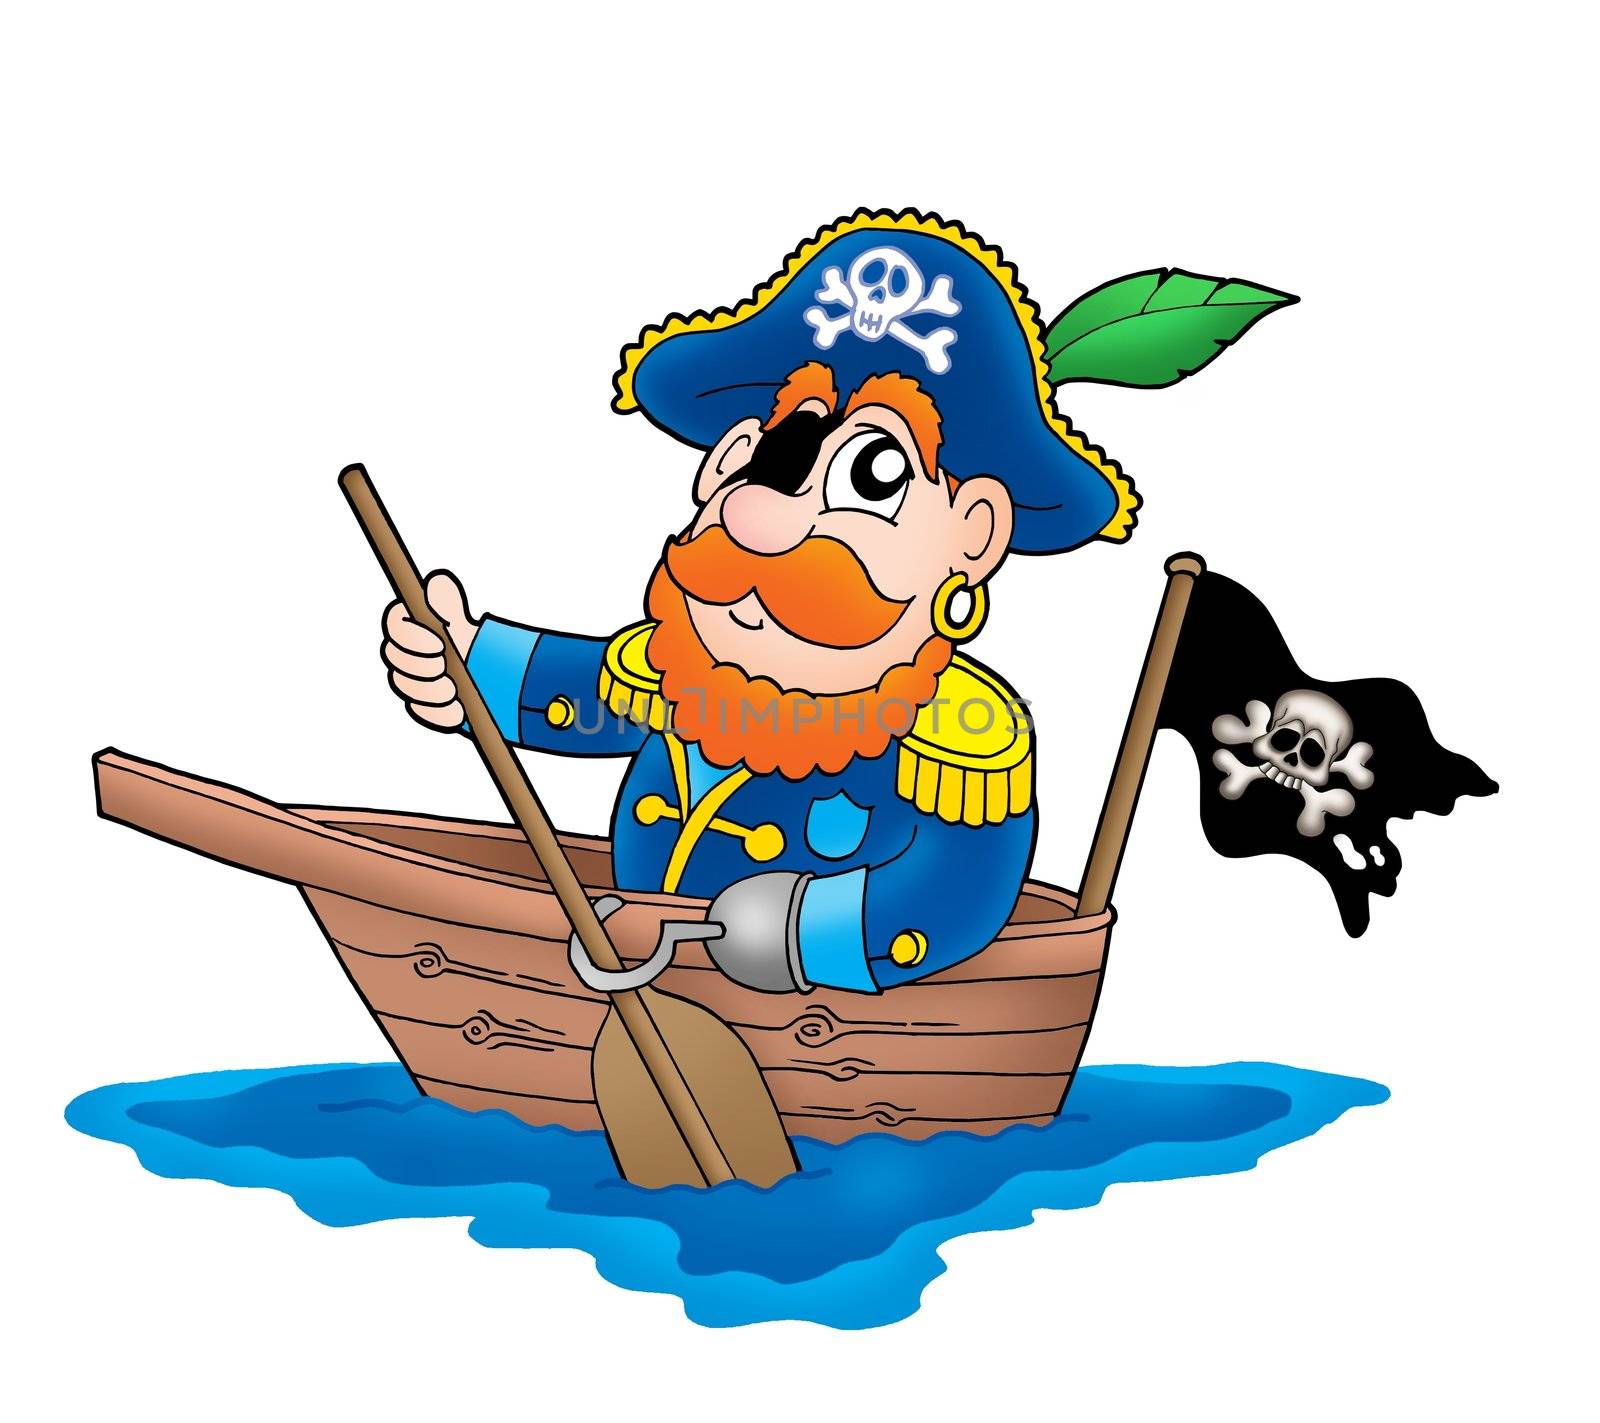 Pirate in the boat - color illustration.